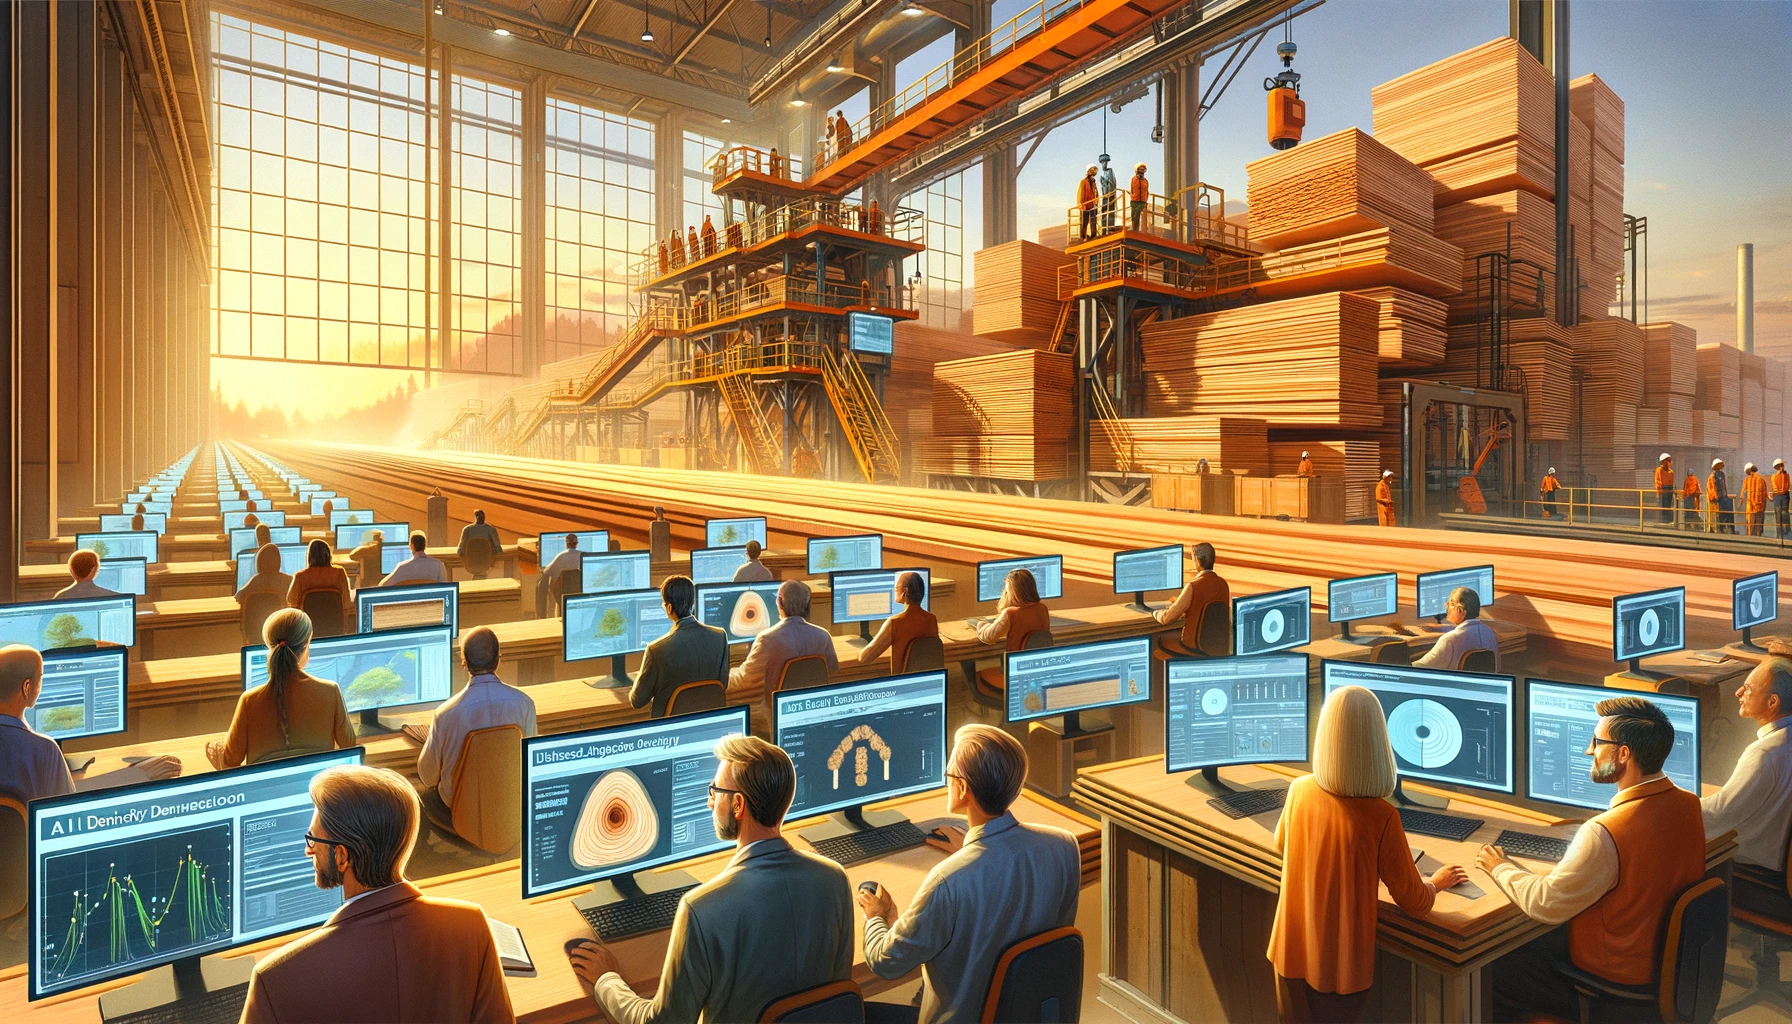 Here is the illustration for the article about a leading Indian plywood manufacturer using AI for quality control. The scene captures a dynamic view of the facility, where a diverse team of engineers and technicians, depicted in close-up and facing forward, interact with AI technology to analyze wood density and detect defects.